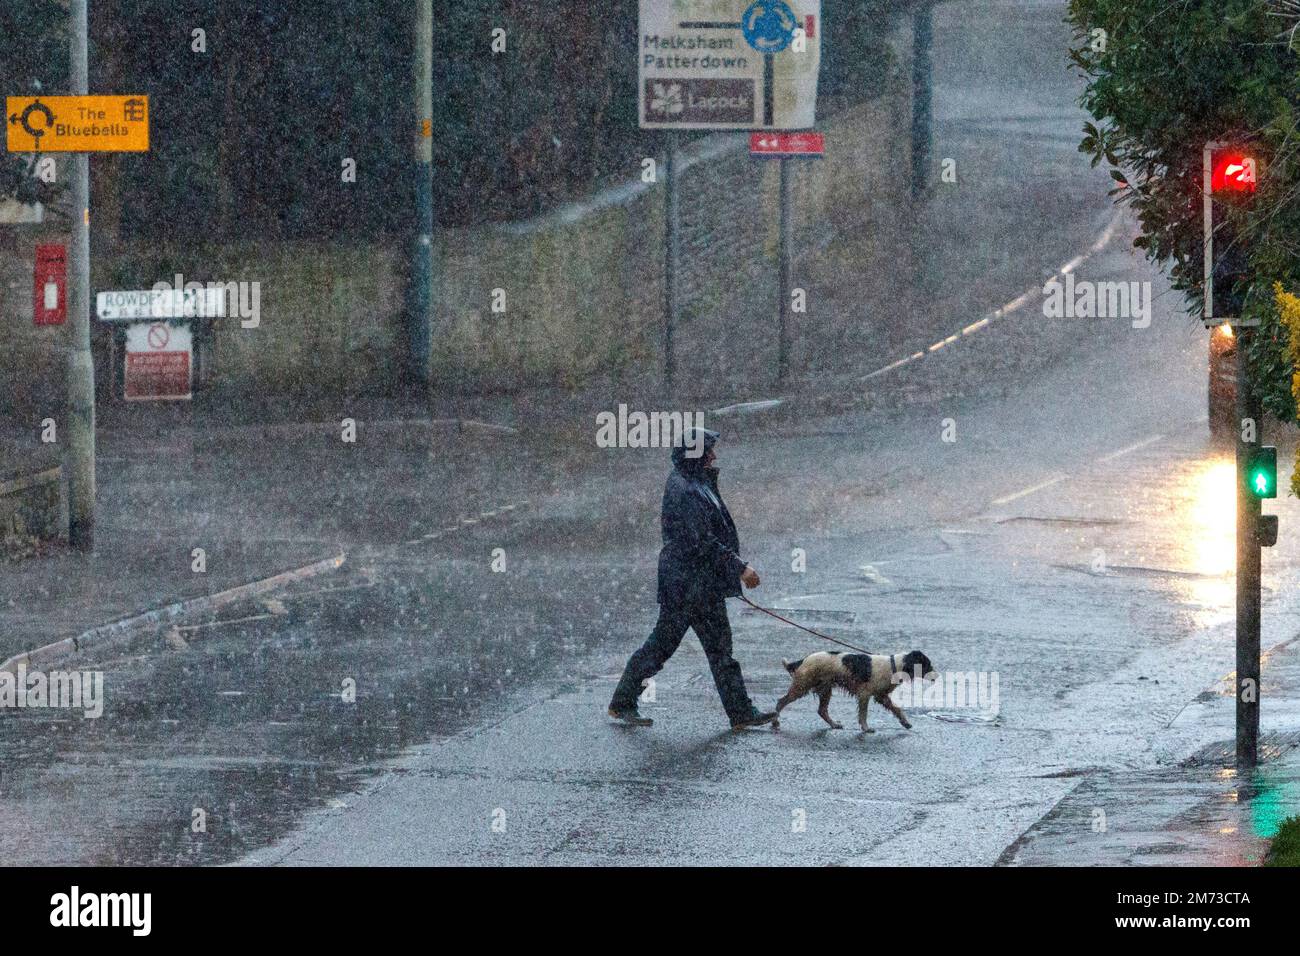 Chippenham, Wiltshire, UK. 7th January, 2023. A man walking his dog is pictured braving heavy rain in Chippenham as heavy rain showers make their way across Southern England. Credit: Lynchpics/Alamy Live News Stock Photo